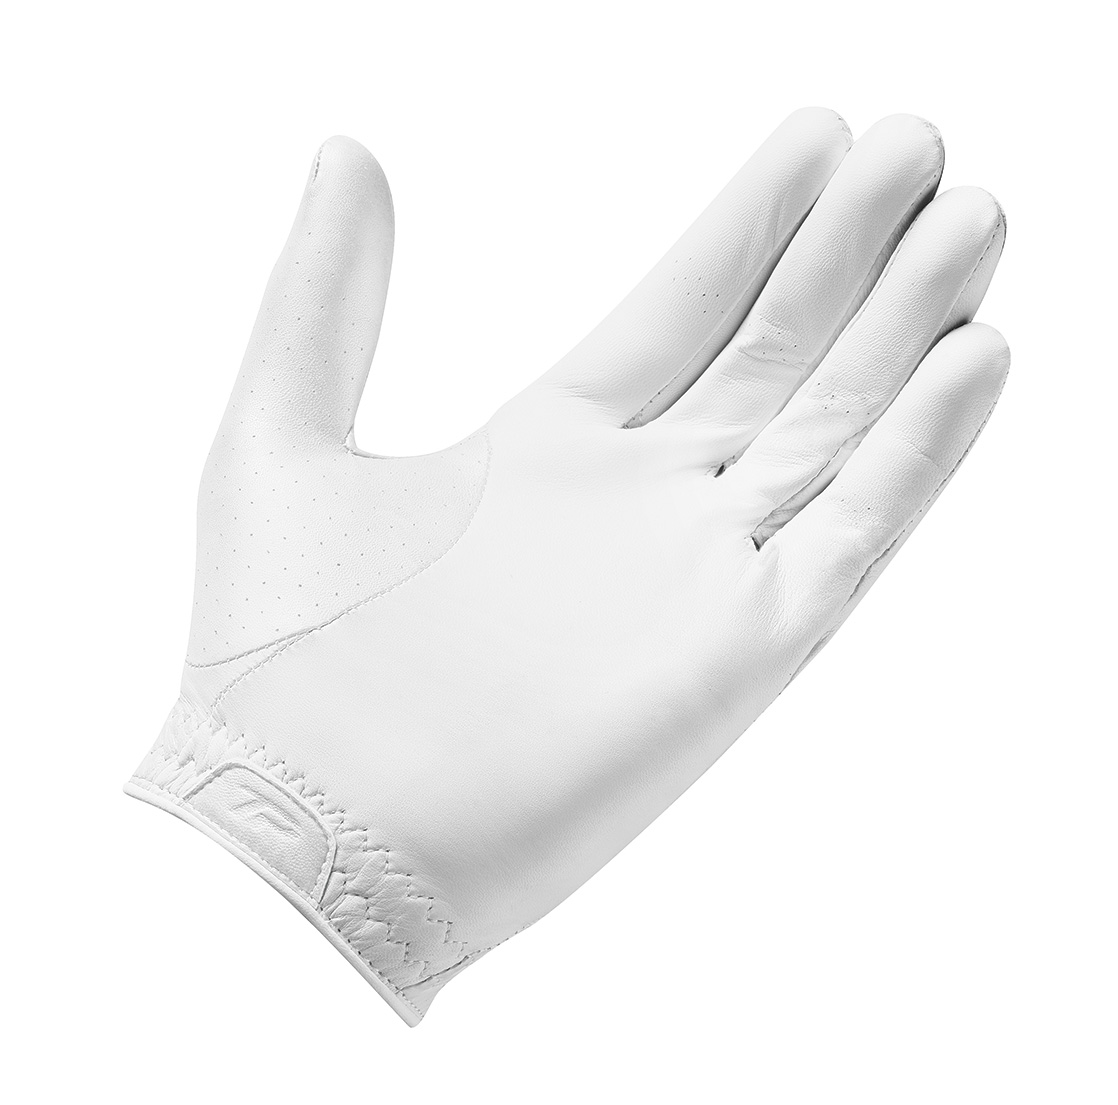 TaylorMade TP Glove Left Hand Cadet Large - image 3 of 3